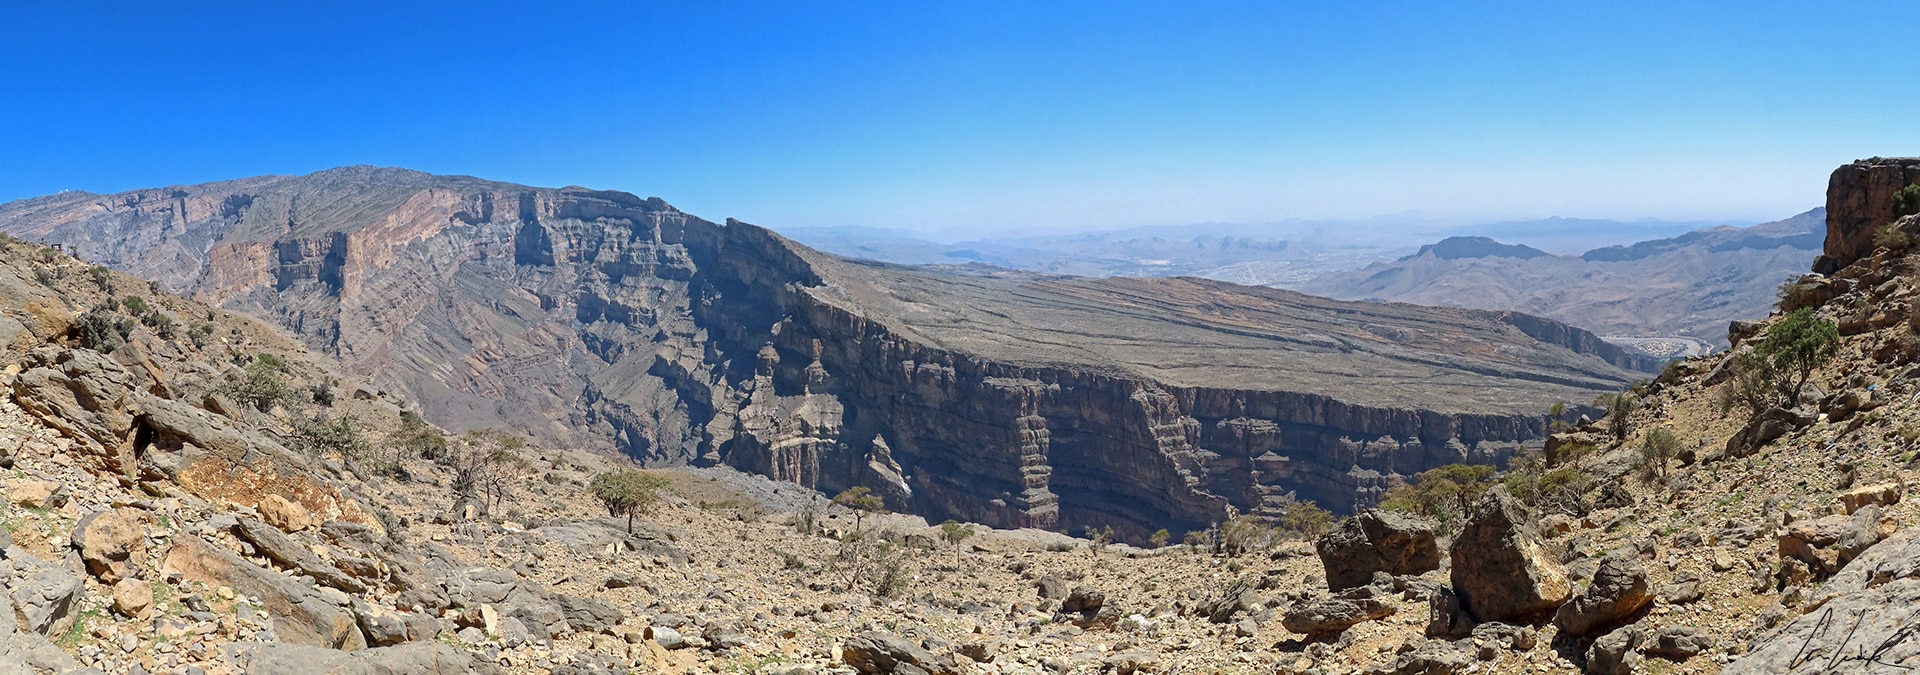 On the plateau at 6,562 feet above sea level, we discover the Grand Canyon of Arabia, a deep fissure in the rock.